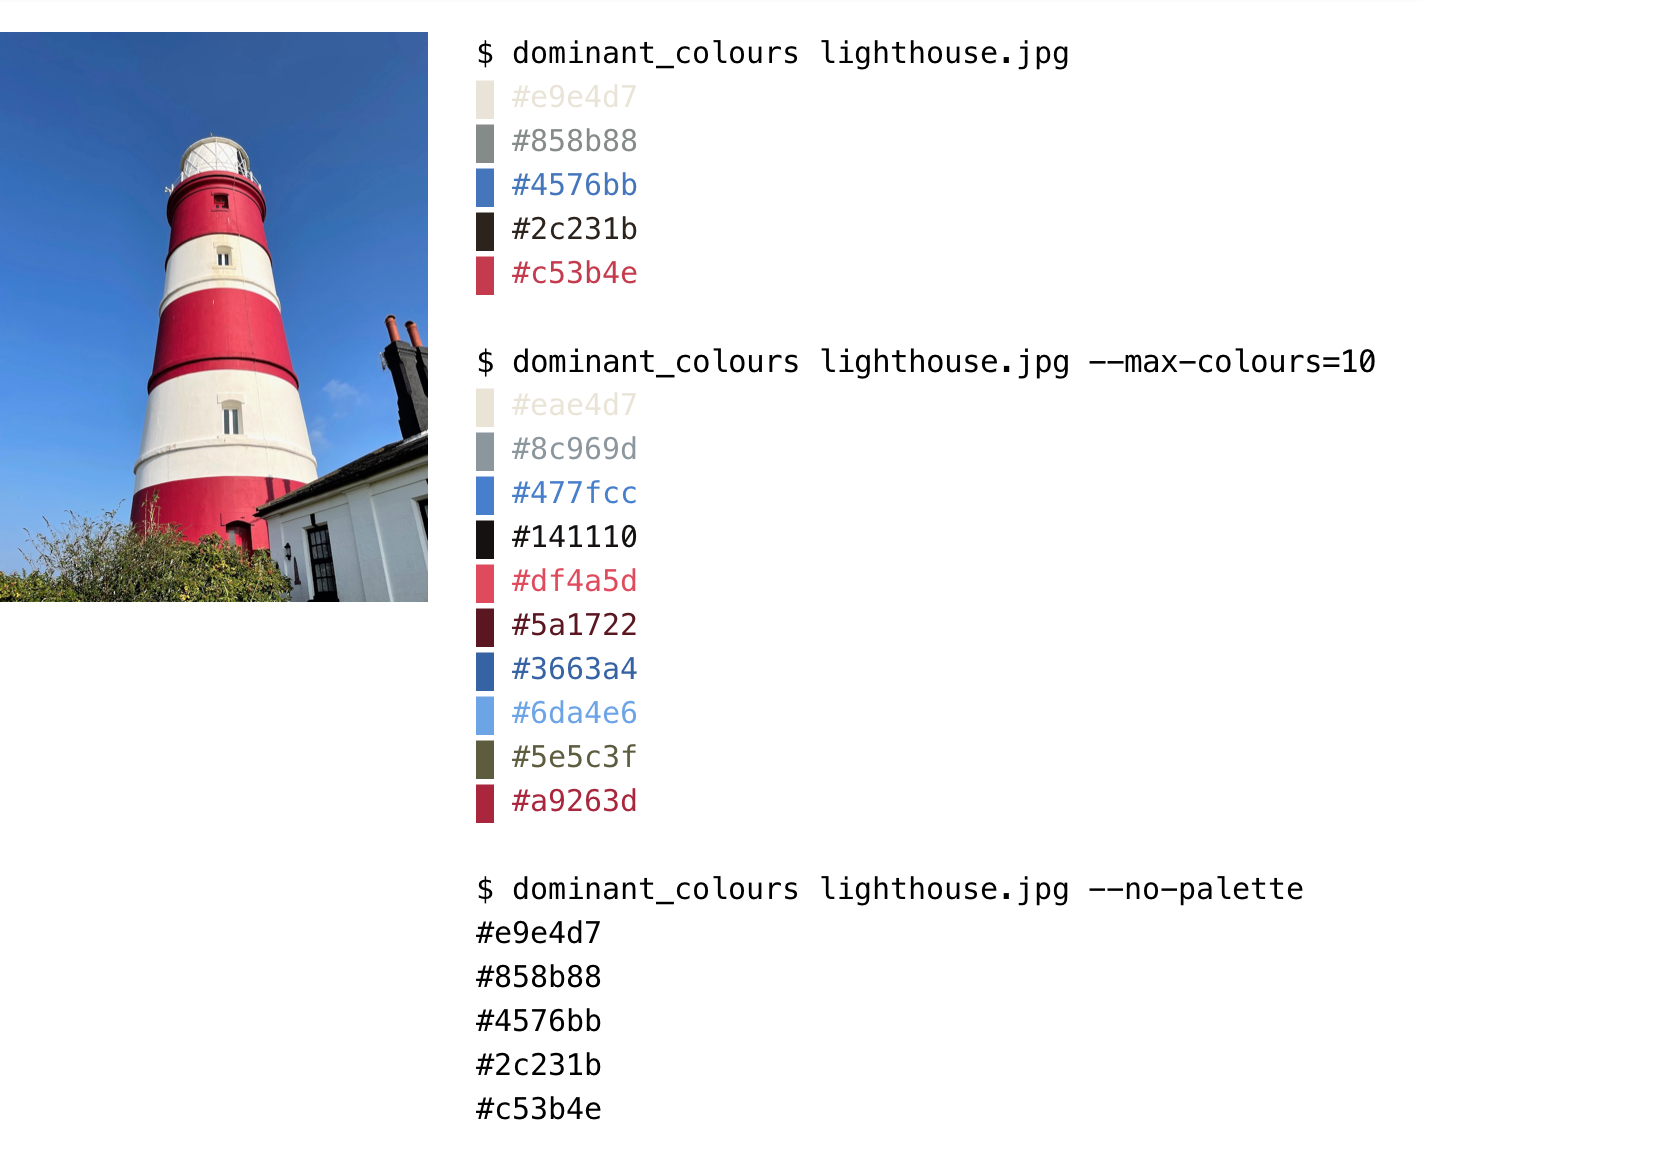 Left: a photo of a red and white lighthouse set against a blue sky. Right: the terminal output of three invocations of 'dominant_colours' against 'lighthouse.jpg', with hex colours printed to the terminal.